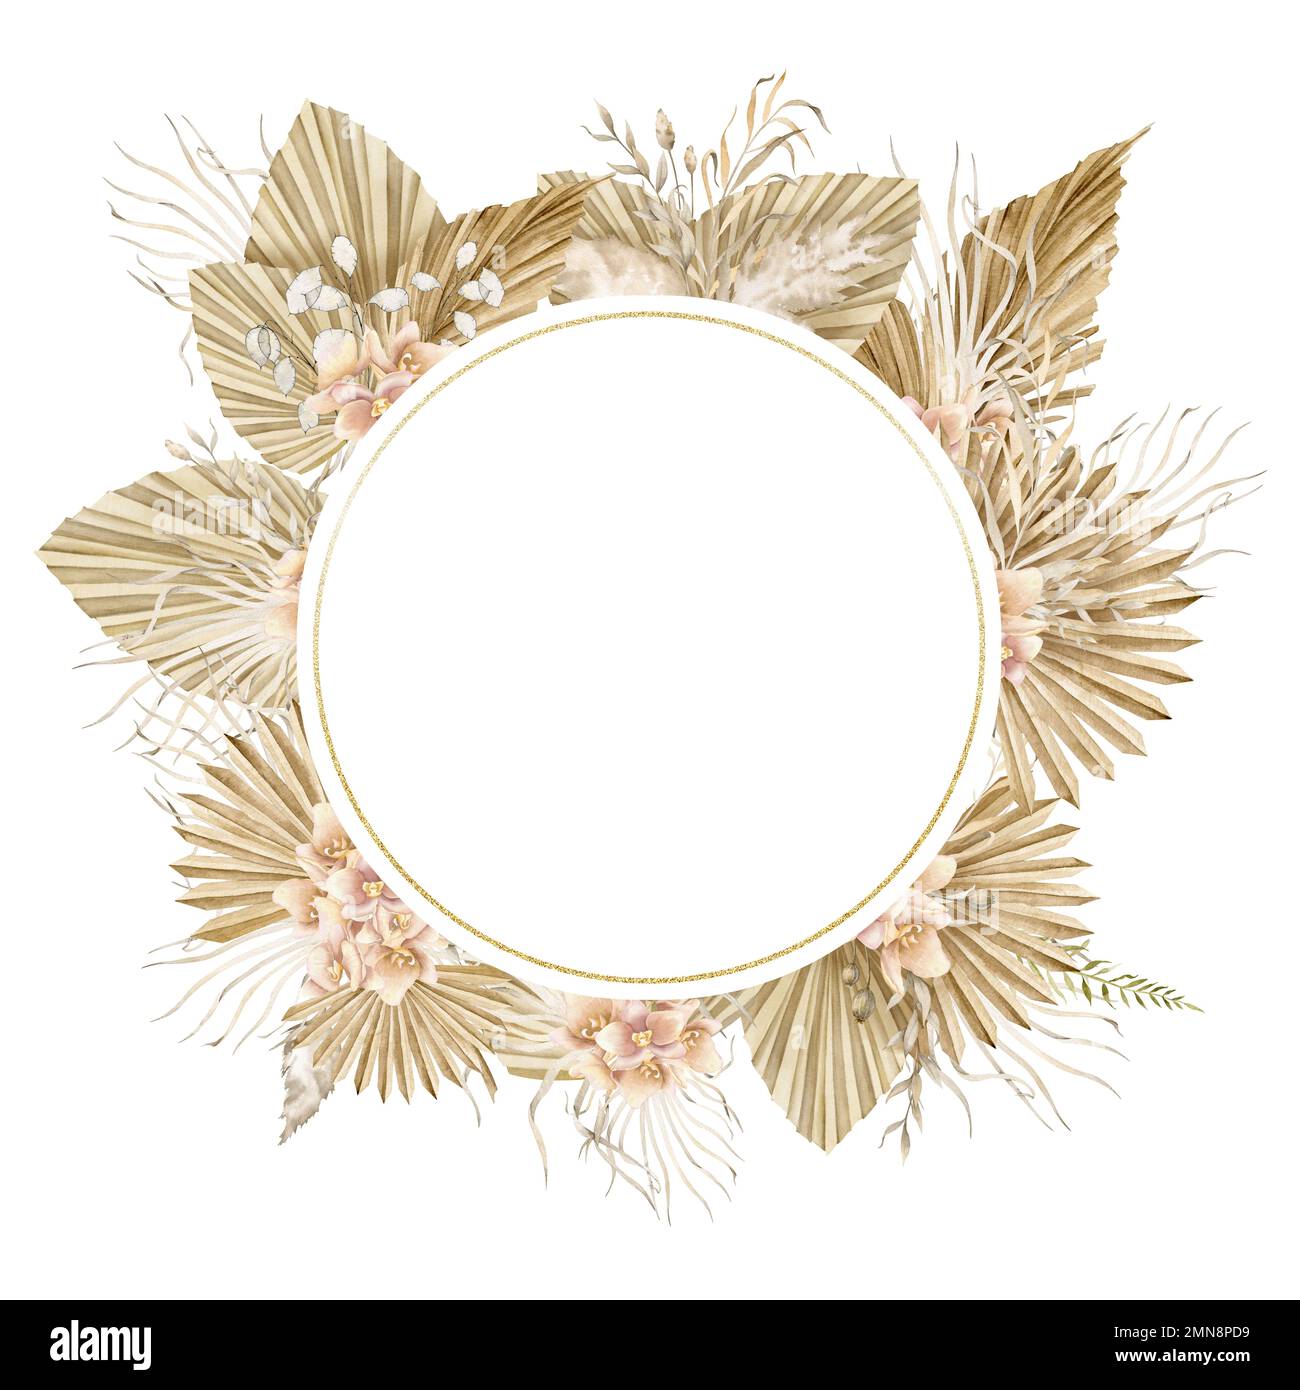 Round Wreath in Boho style. Hand drawn bohemian floral Circle Frame with Palm leaves and orchids on isolated background. Dried tropical plants with golden texture for wedding invitations or cards. Stock Photo